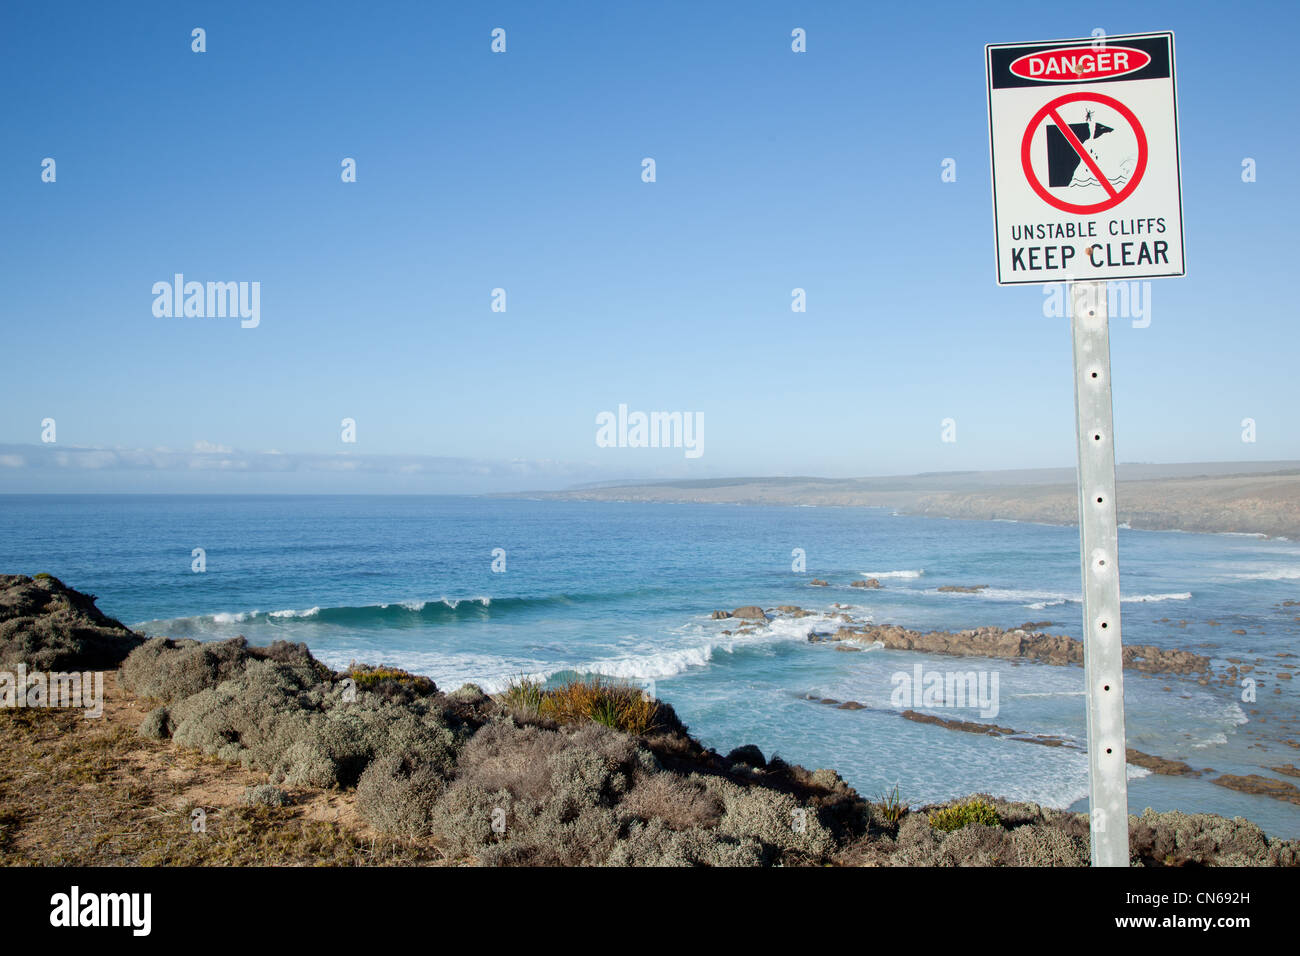 Unstable cliff warning sign. Sleaford Bay. Eyre Peninsula South Australia Stock Photo